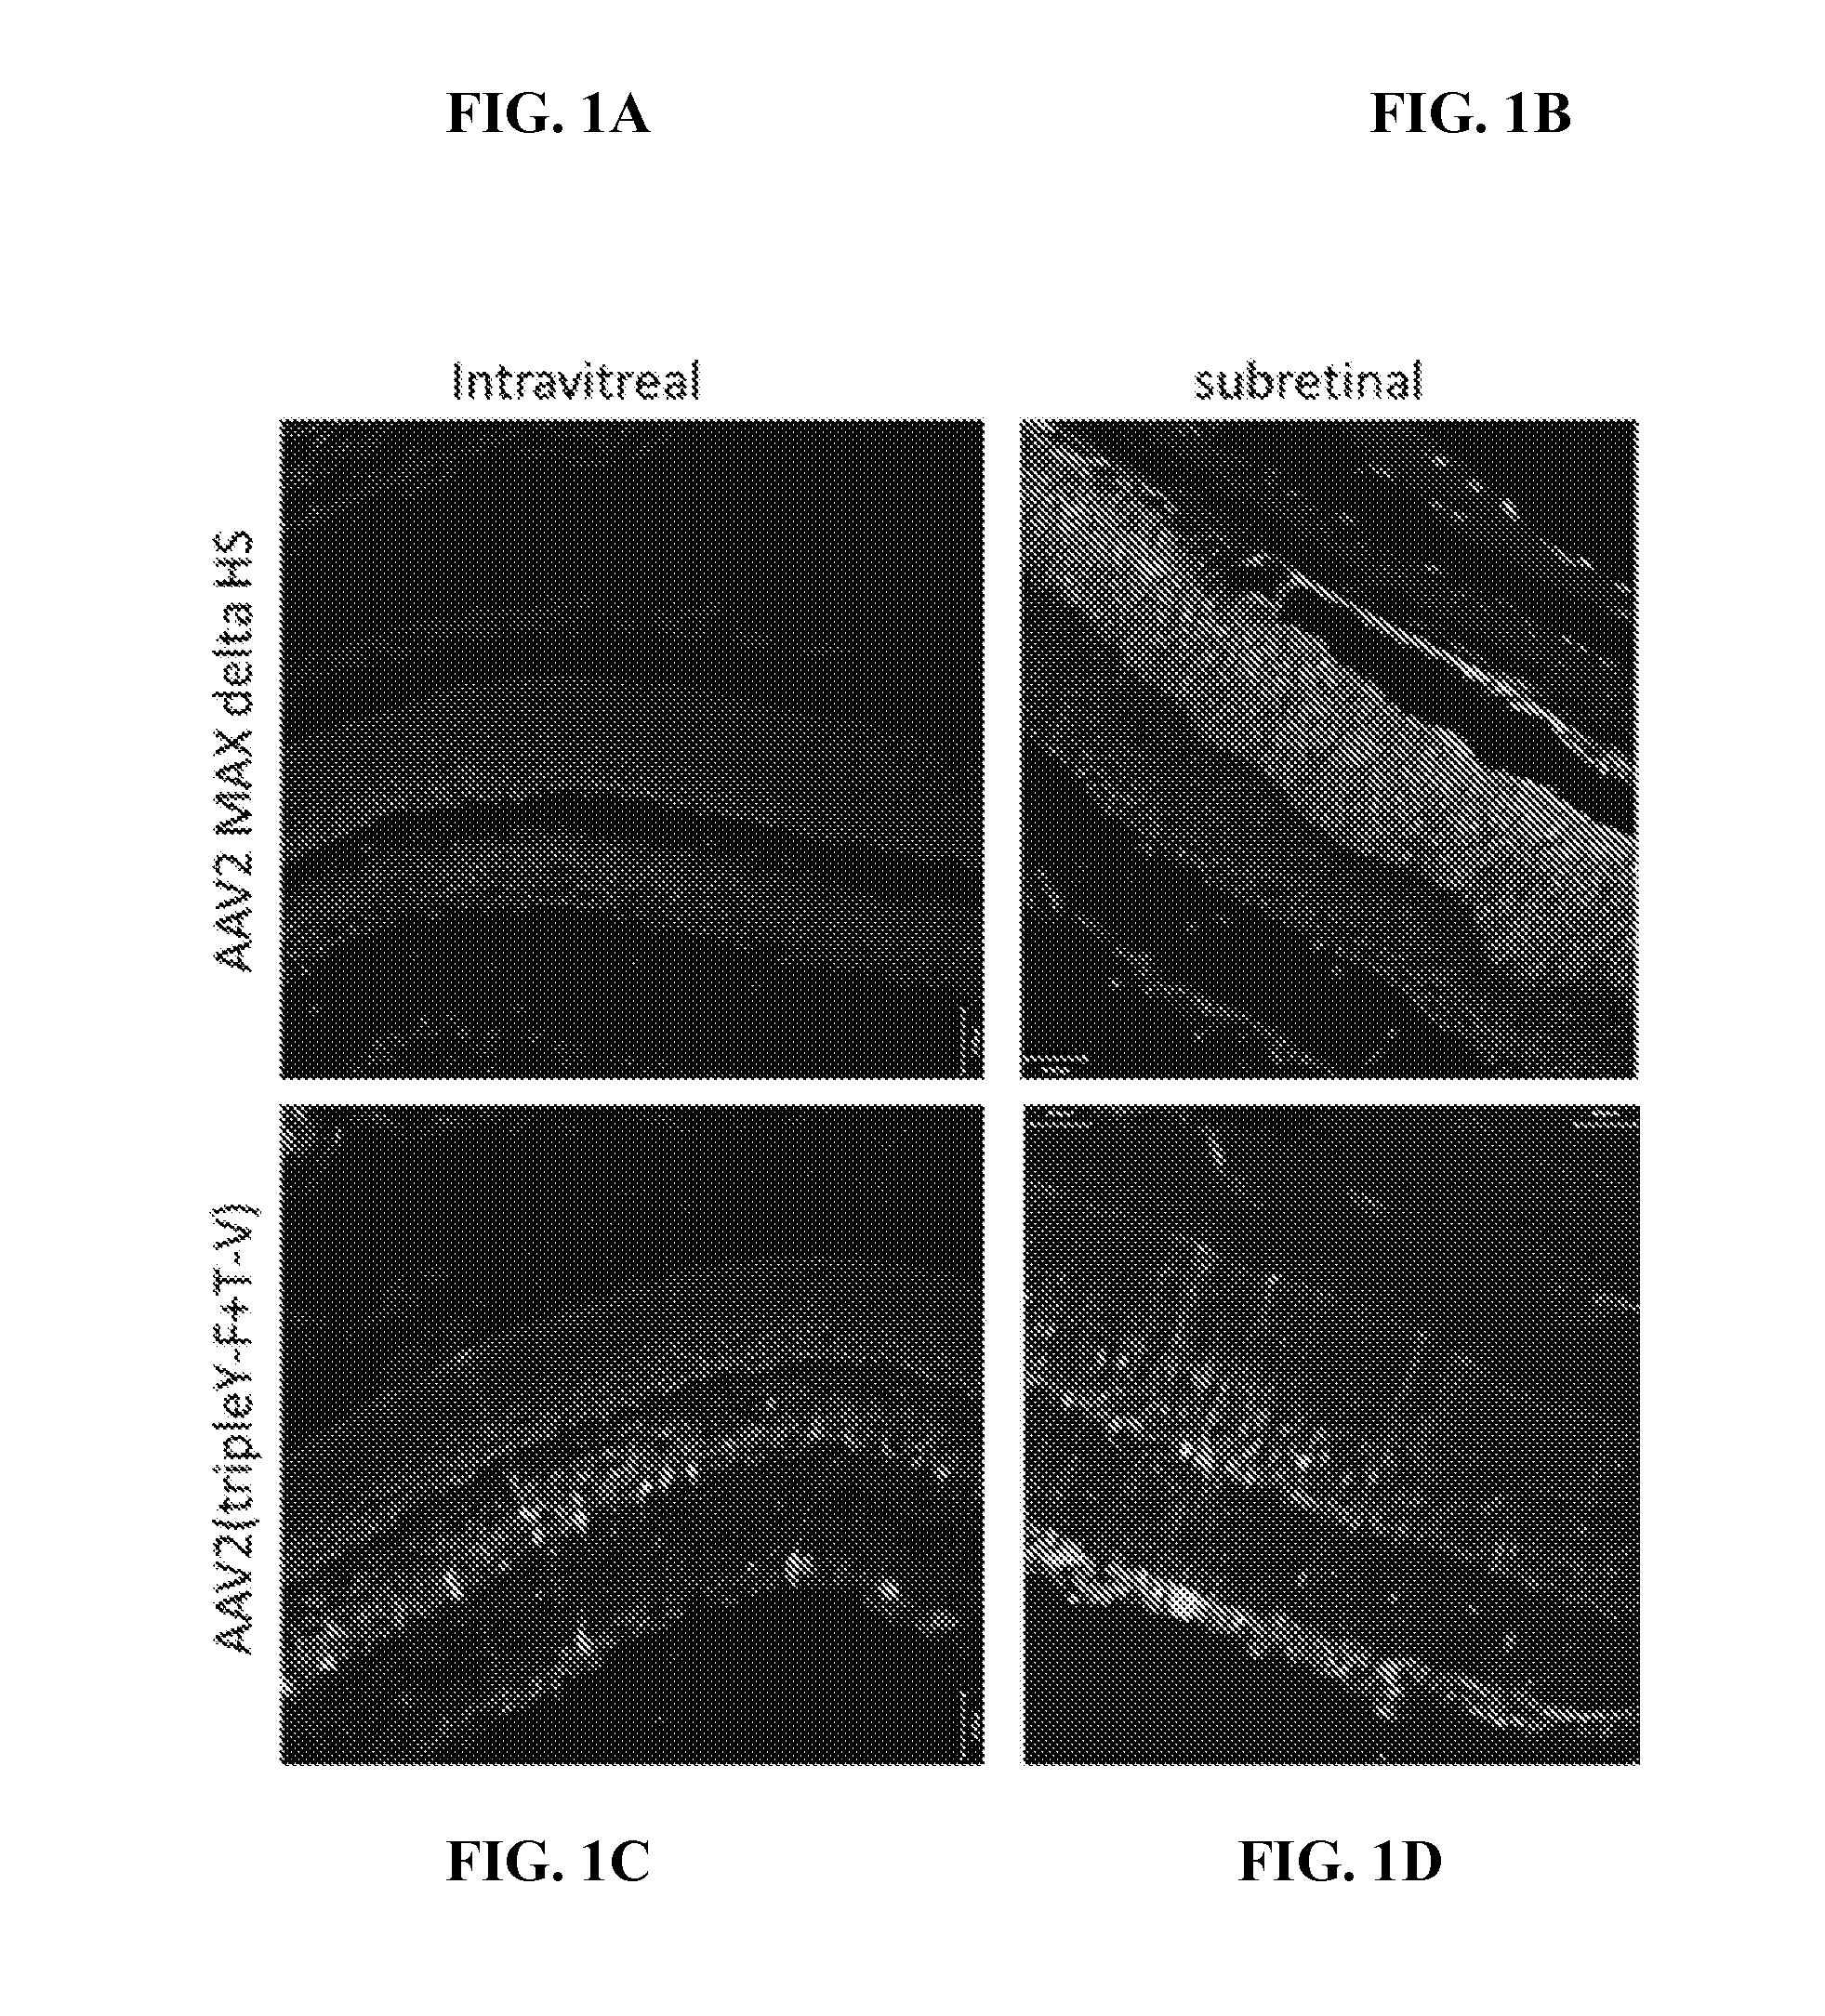 Improved raav vectors and methods for transduction of photoreceptors and rpe cells